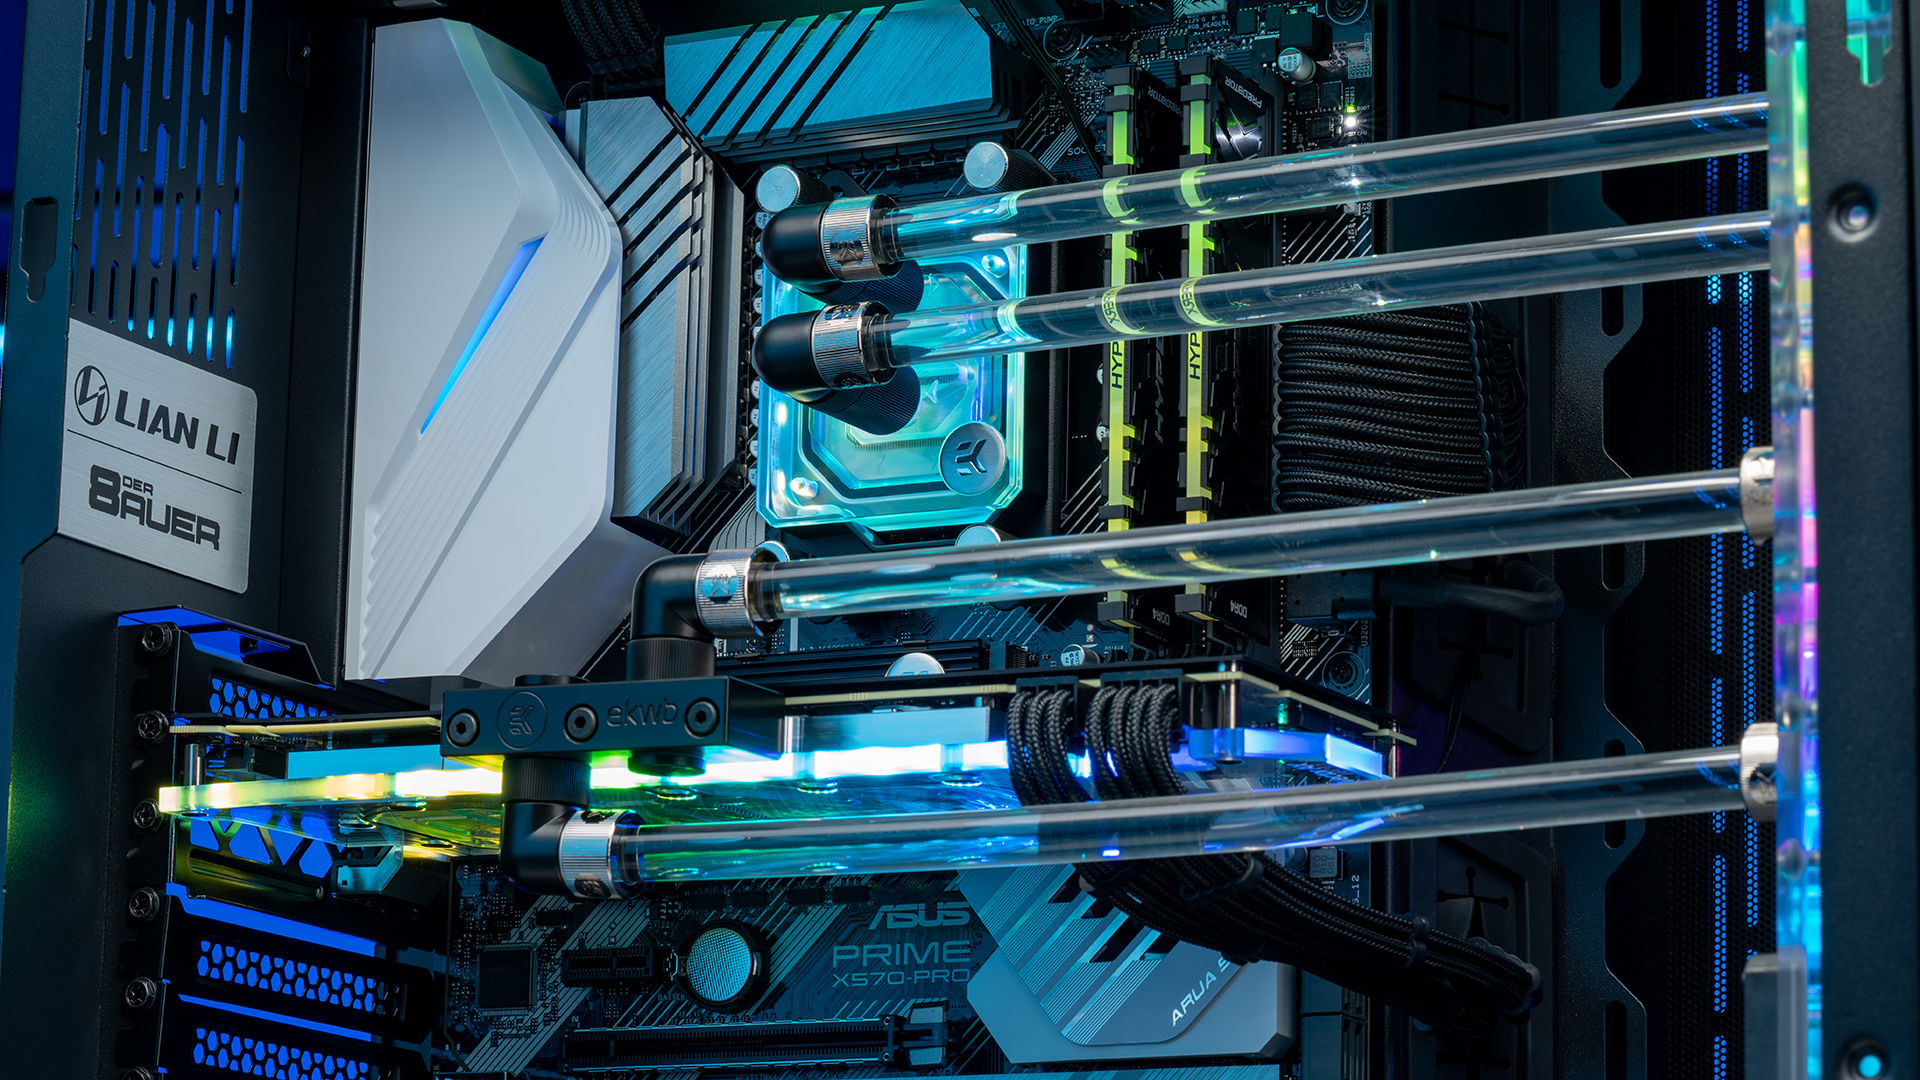 The EK Gaming Conquest PC is a work of art Newegg